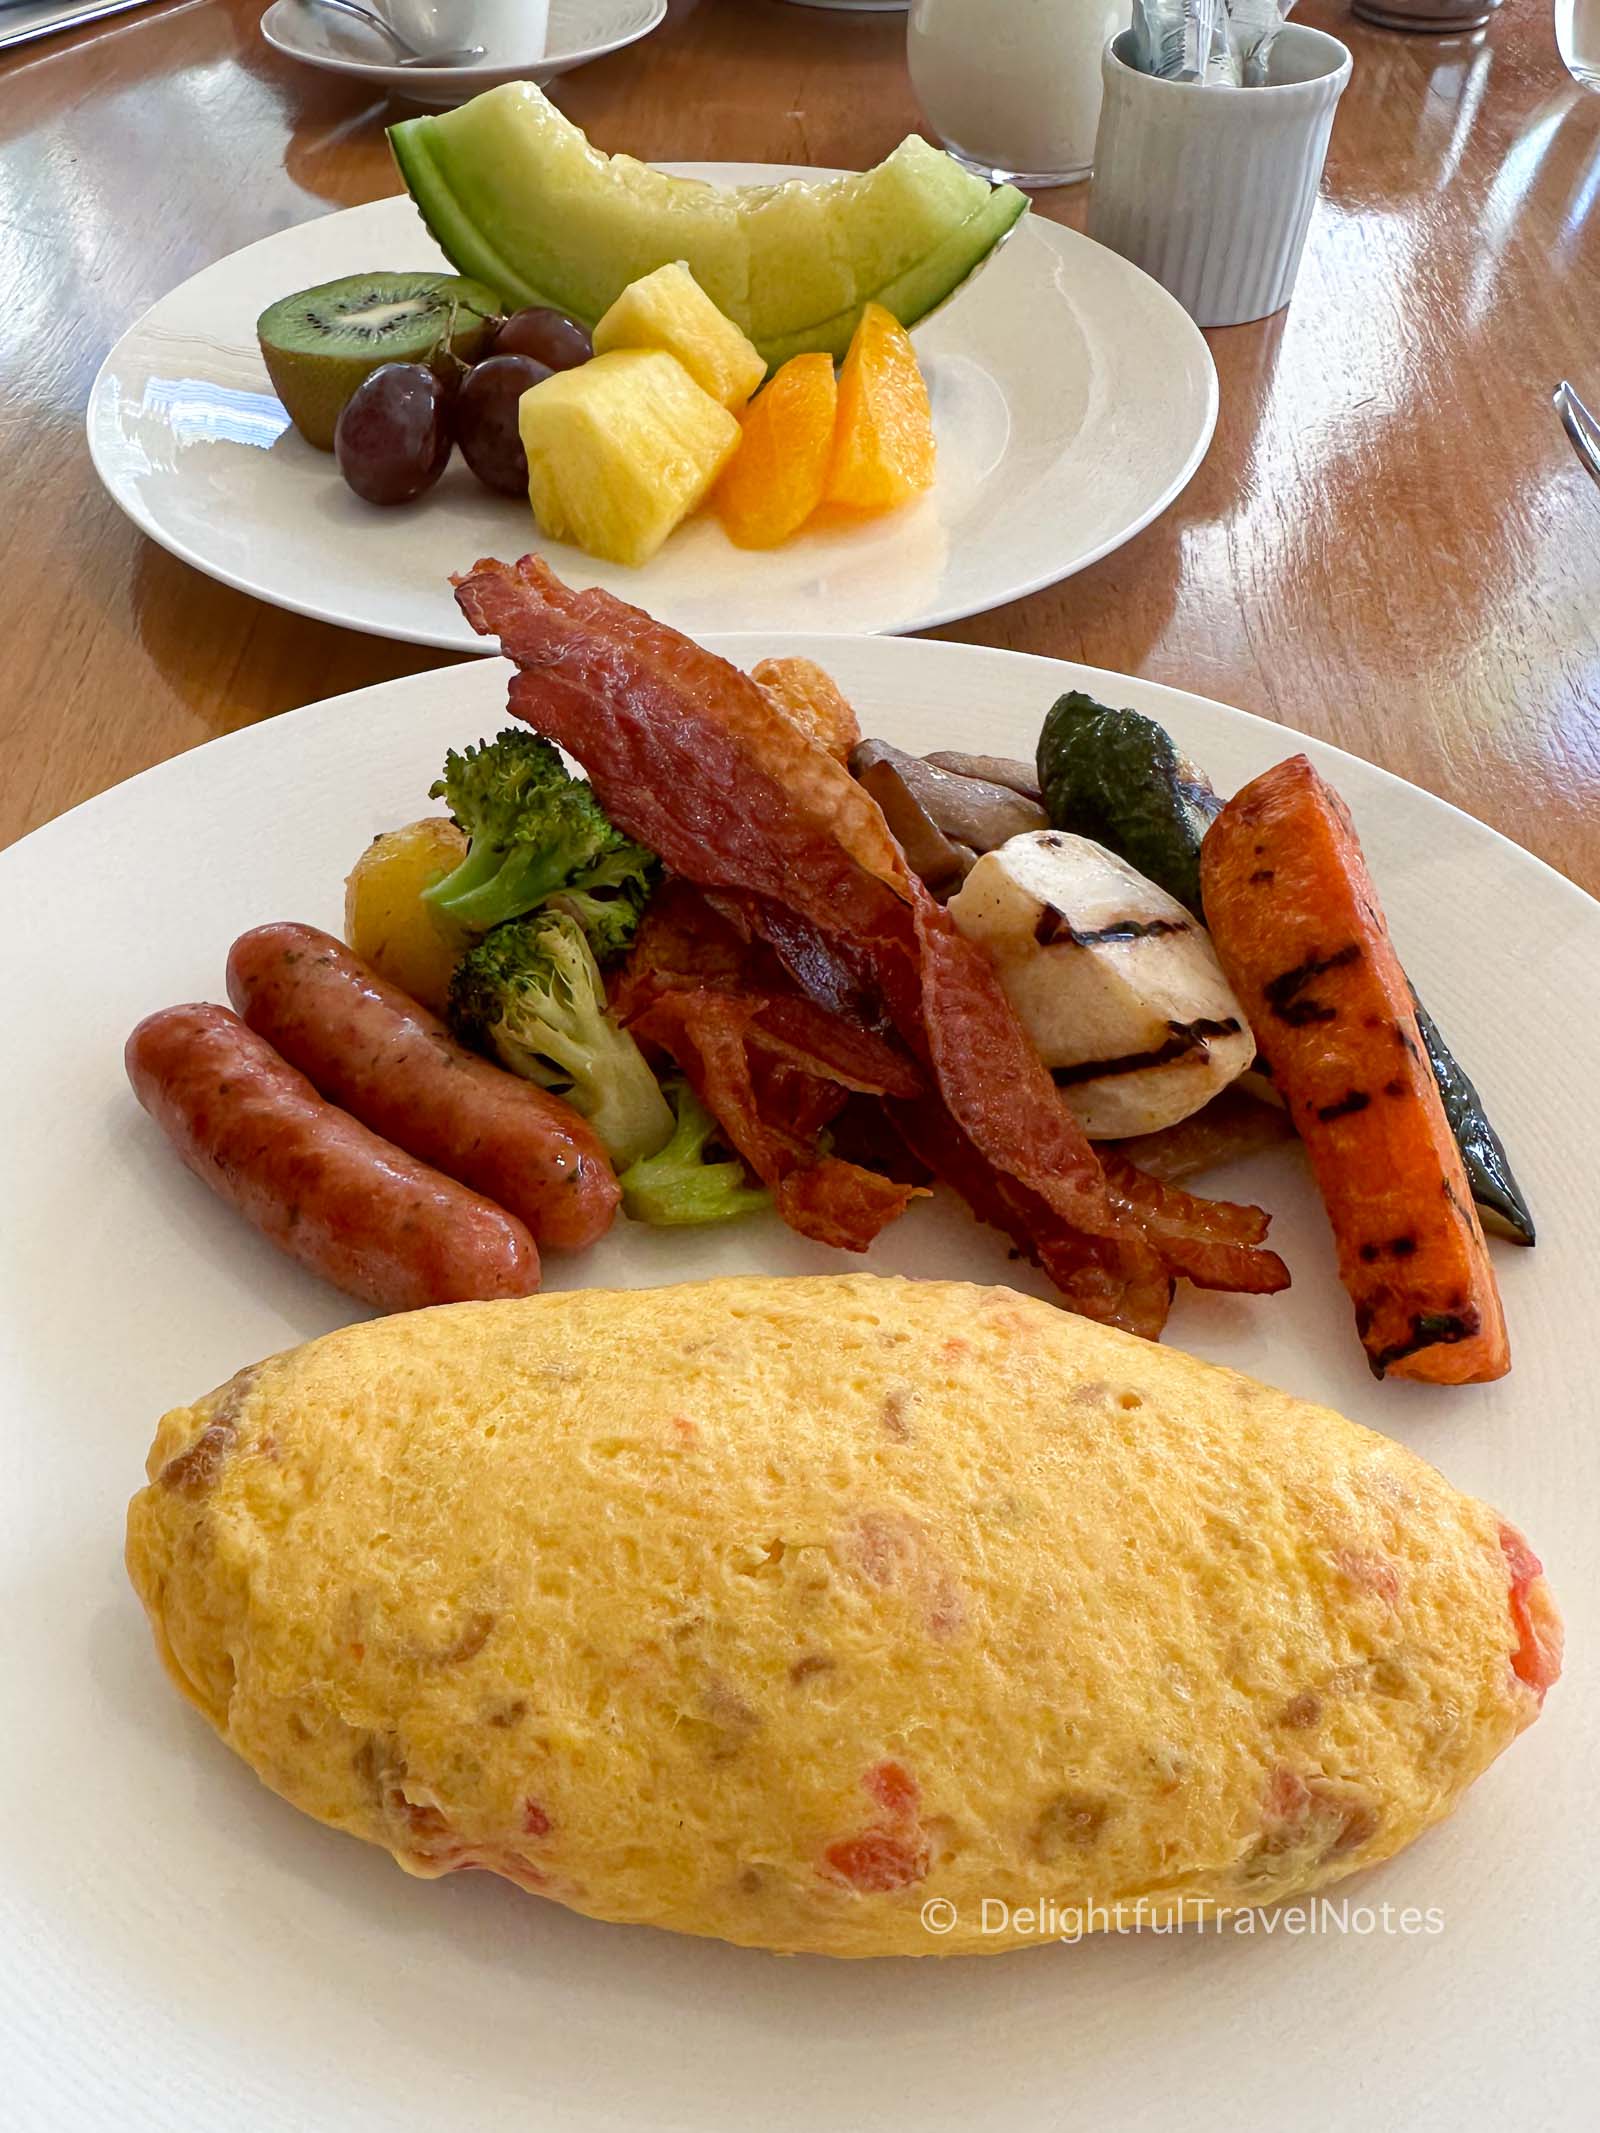 a plate of omelet with bacon, sausage and fruit platter for breakfast at Hyatt Regency hotel in Hakone